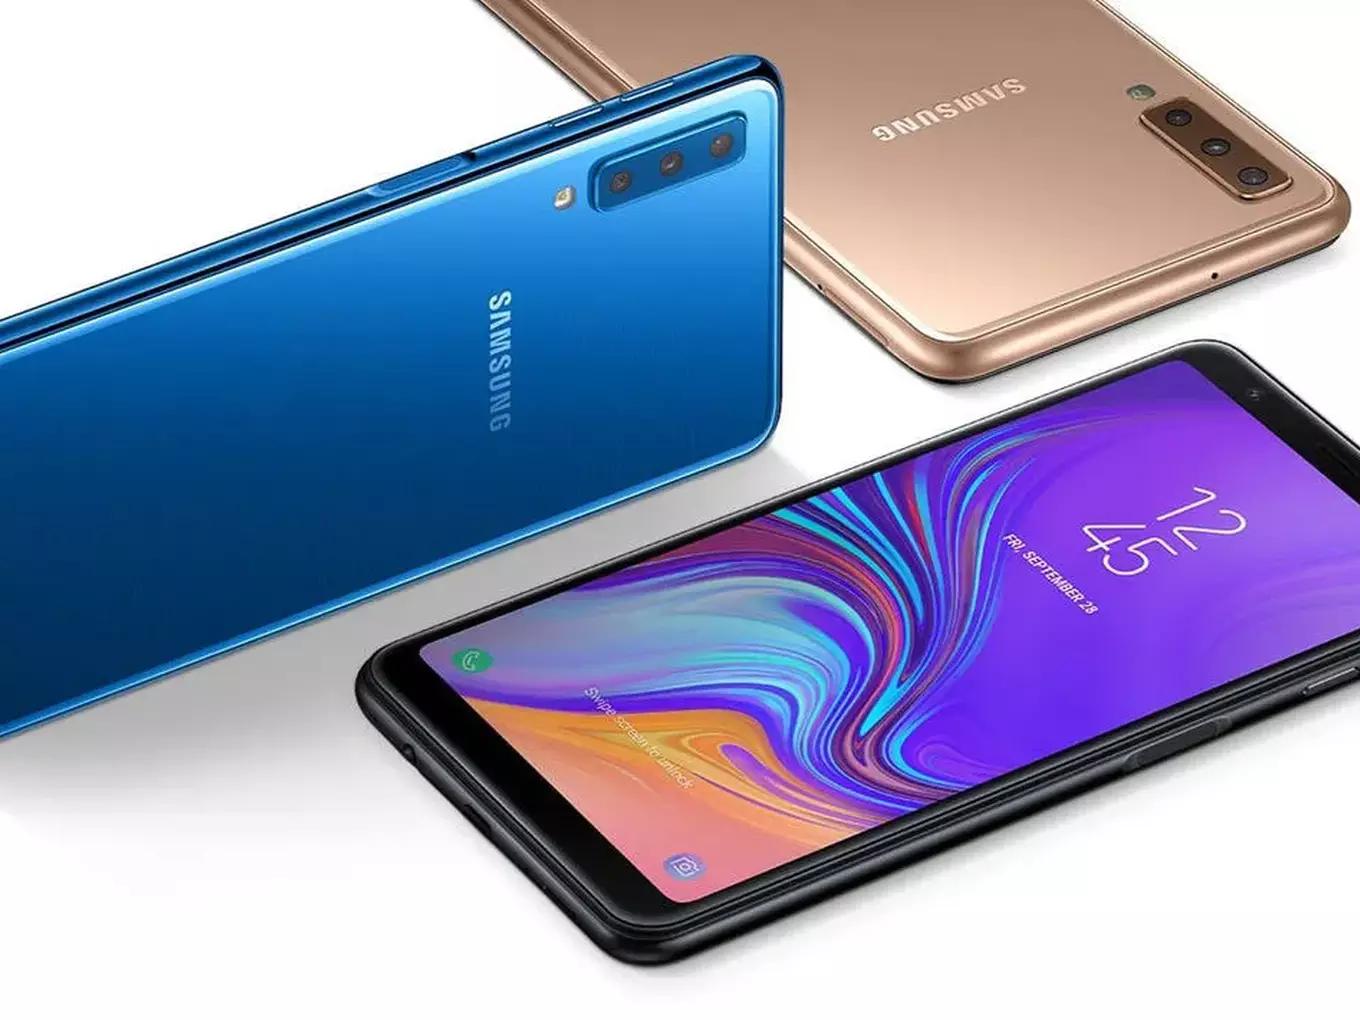 Samsung Expects $1 Bn Revenue From Online Smartphone Sales In India For 2019